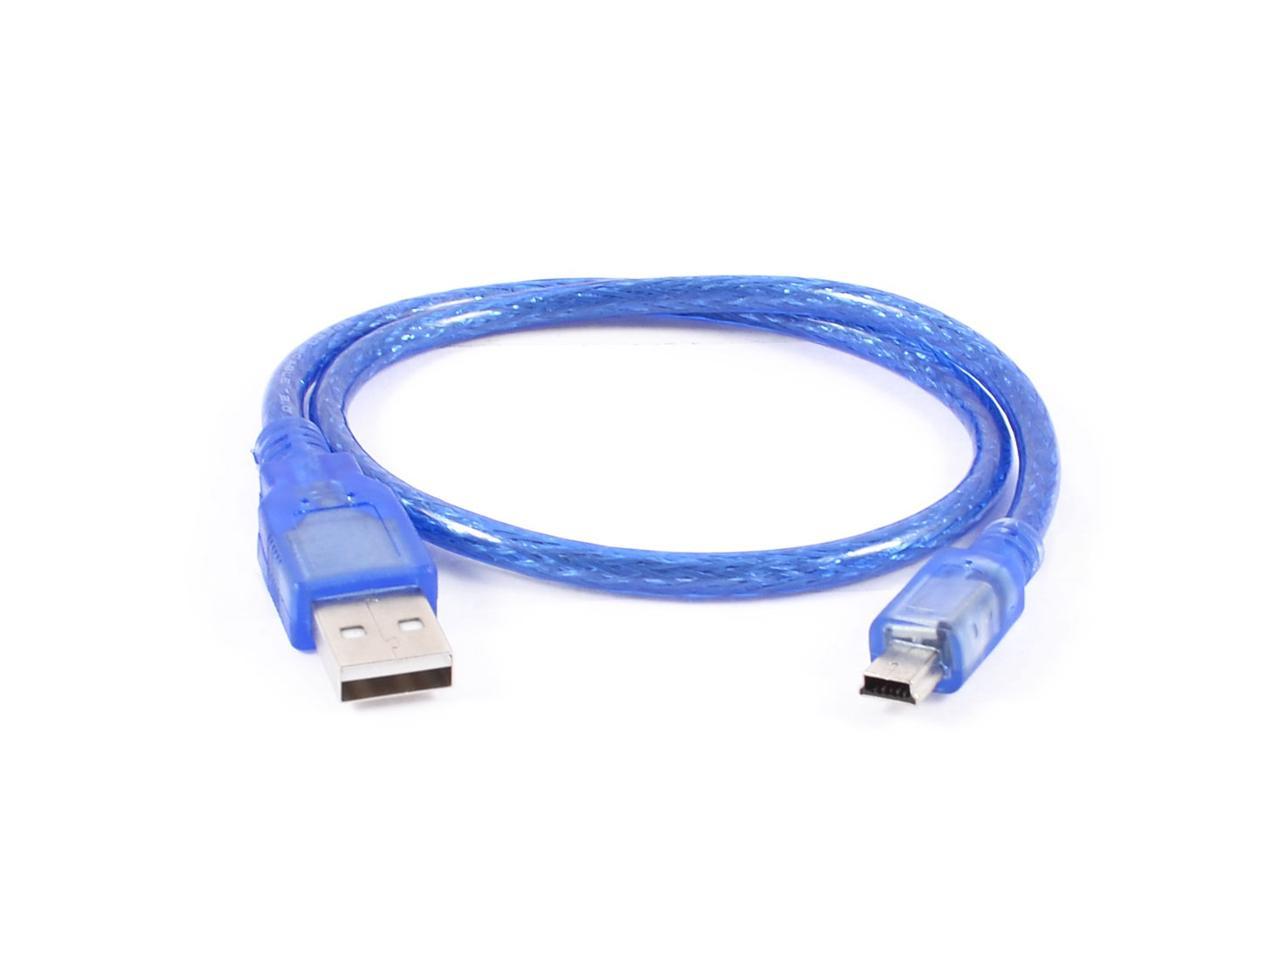 TECHDELIVERS 50cm Blue USB 2.0 Type A Male to Mini USB Male Extension Cable Cord Lead Multipurpose High Speed